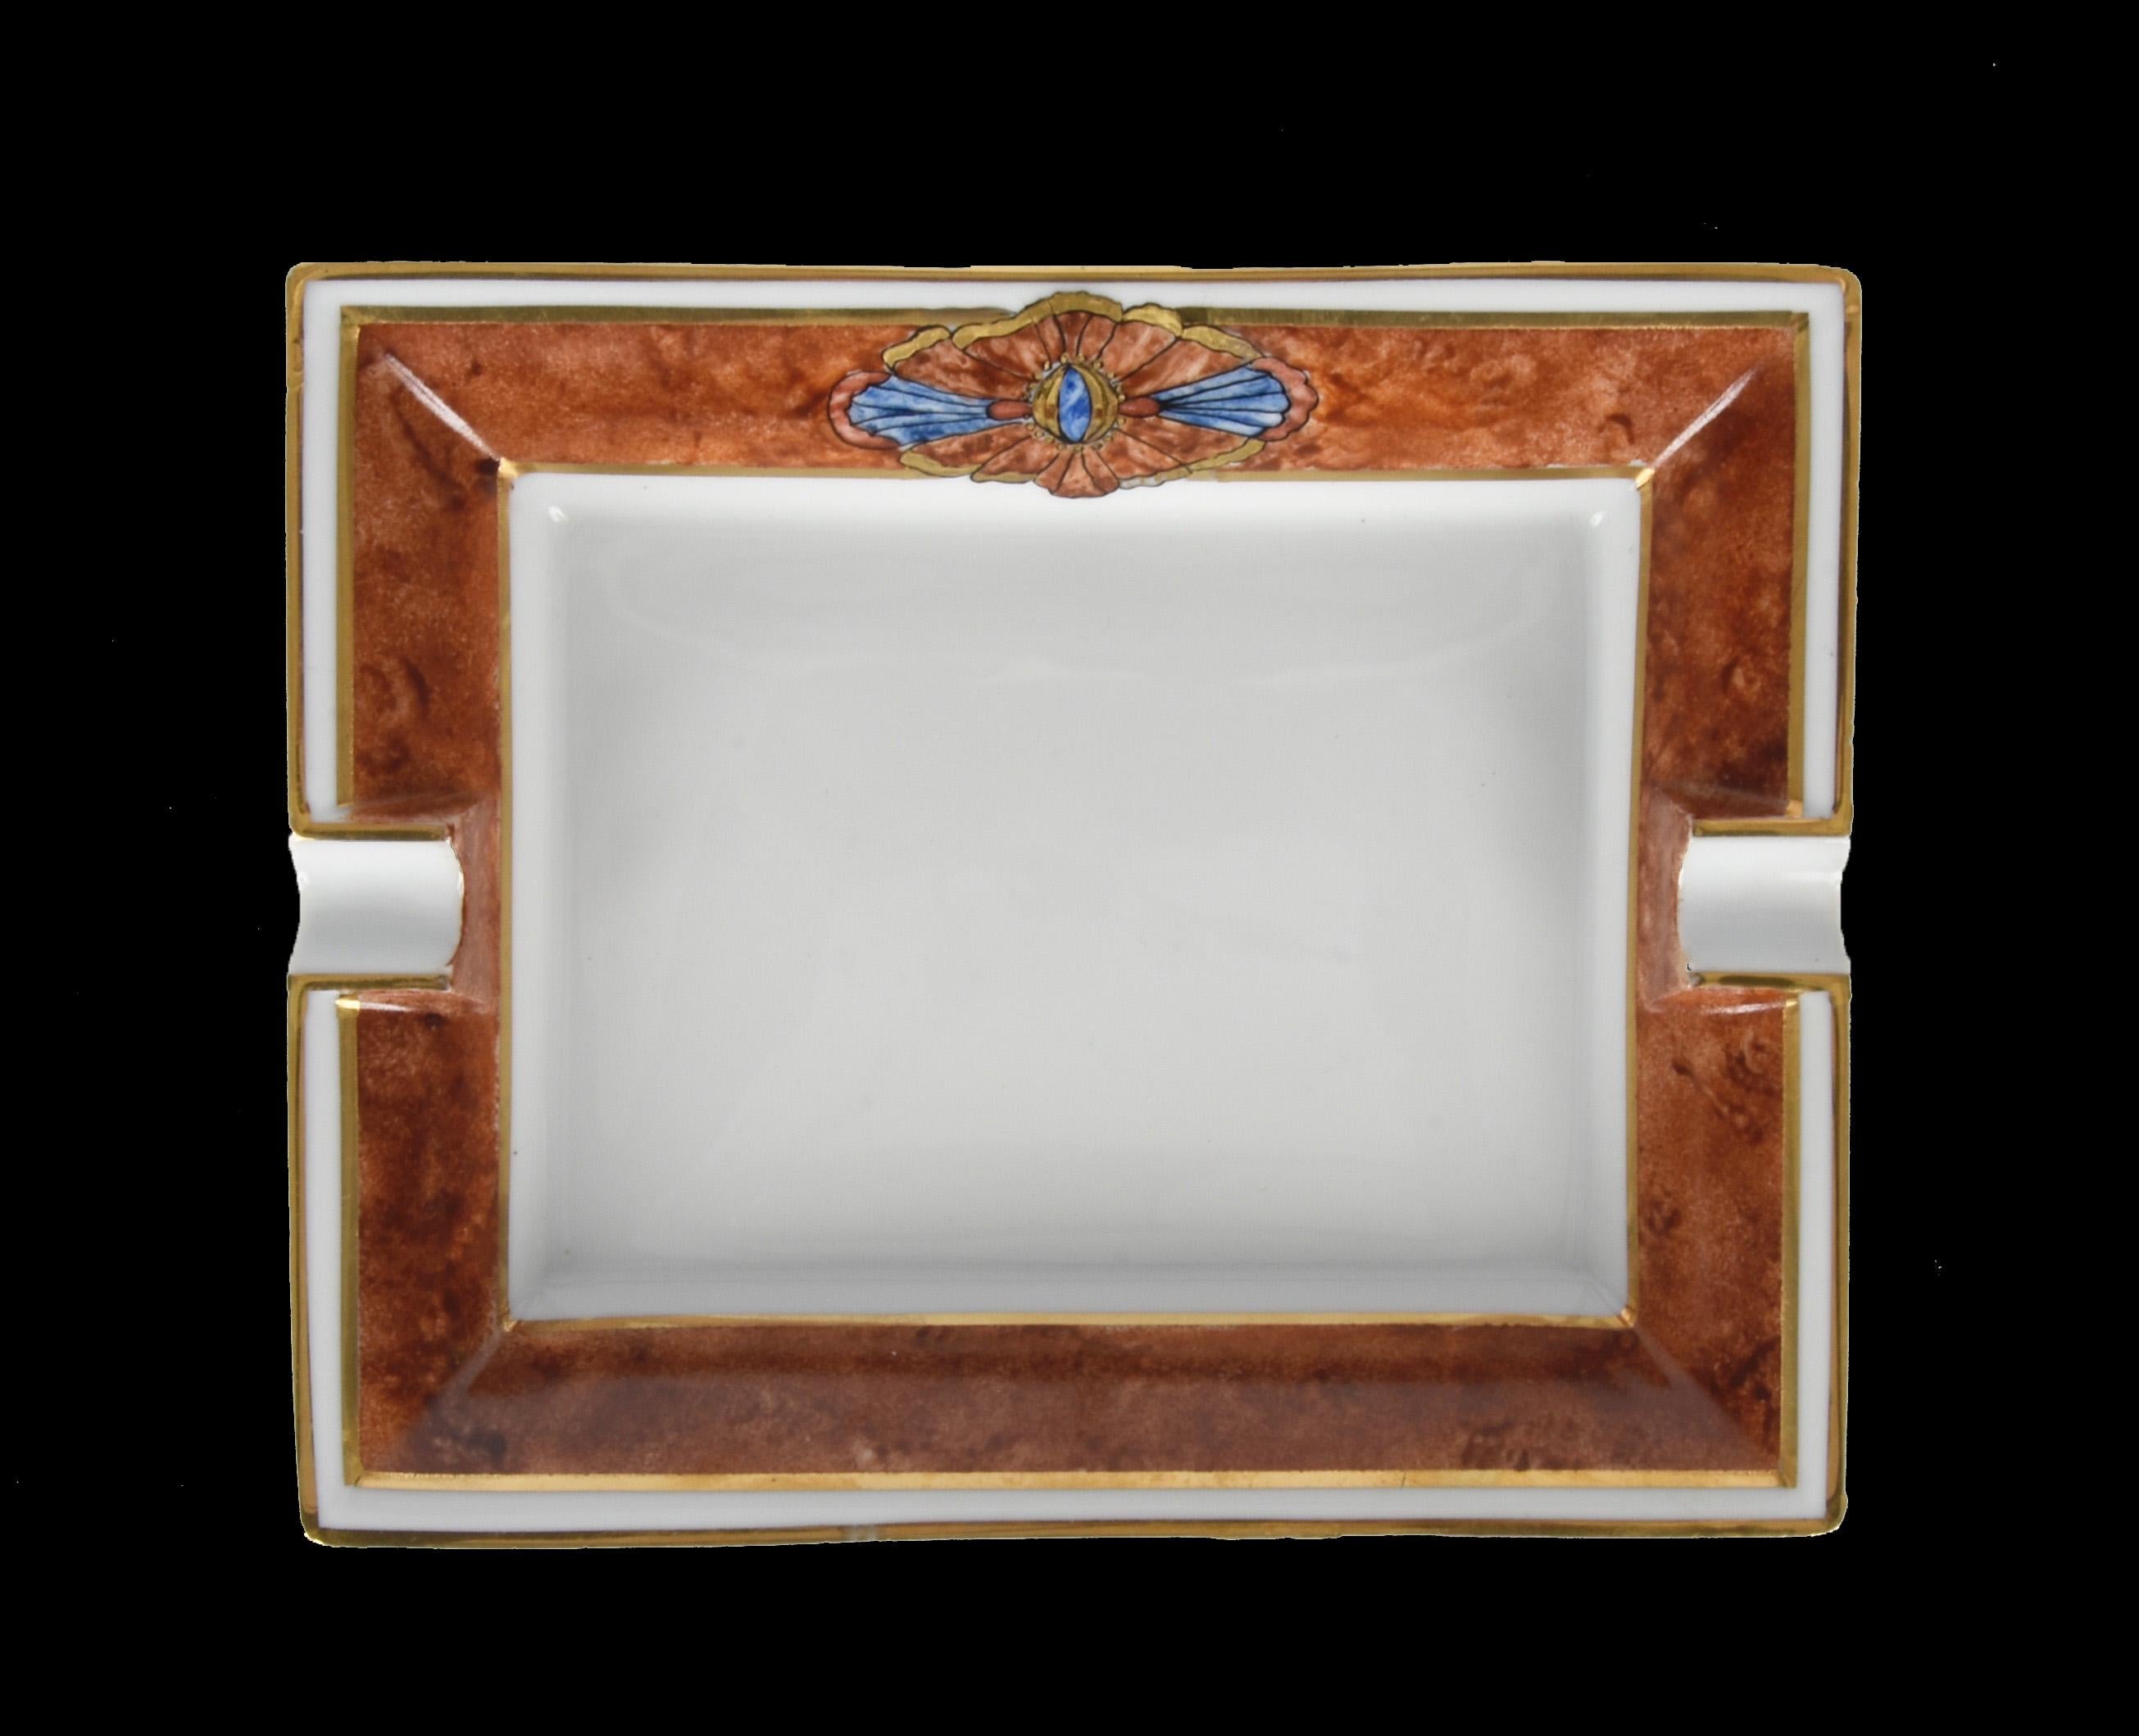 Amazing midcentury Limoges hand-painted white porcelain ashtray. This fantastic piece was hand-painted by Giulia Lucente Cevoli in Italy during the 1980s.

The porcelain is candid and is painted with precision and mastery by Giulia Lucente Cevoli,